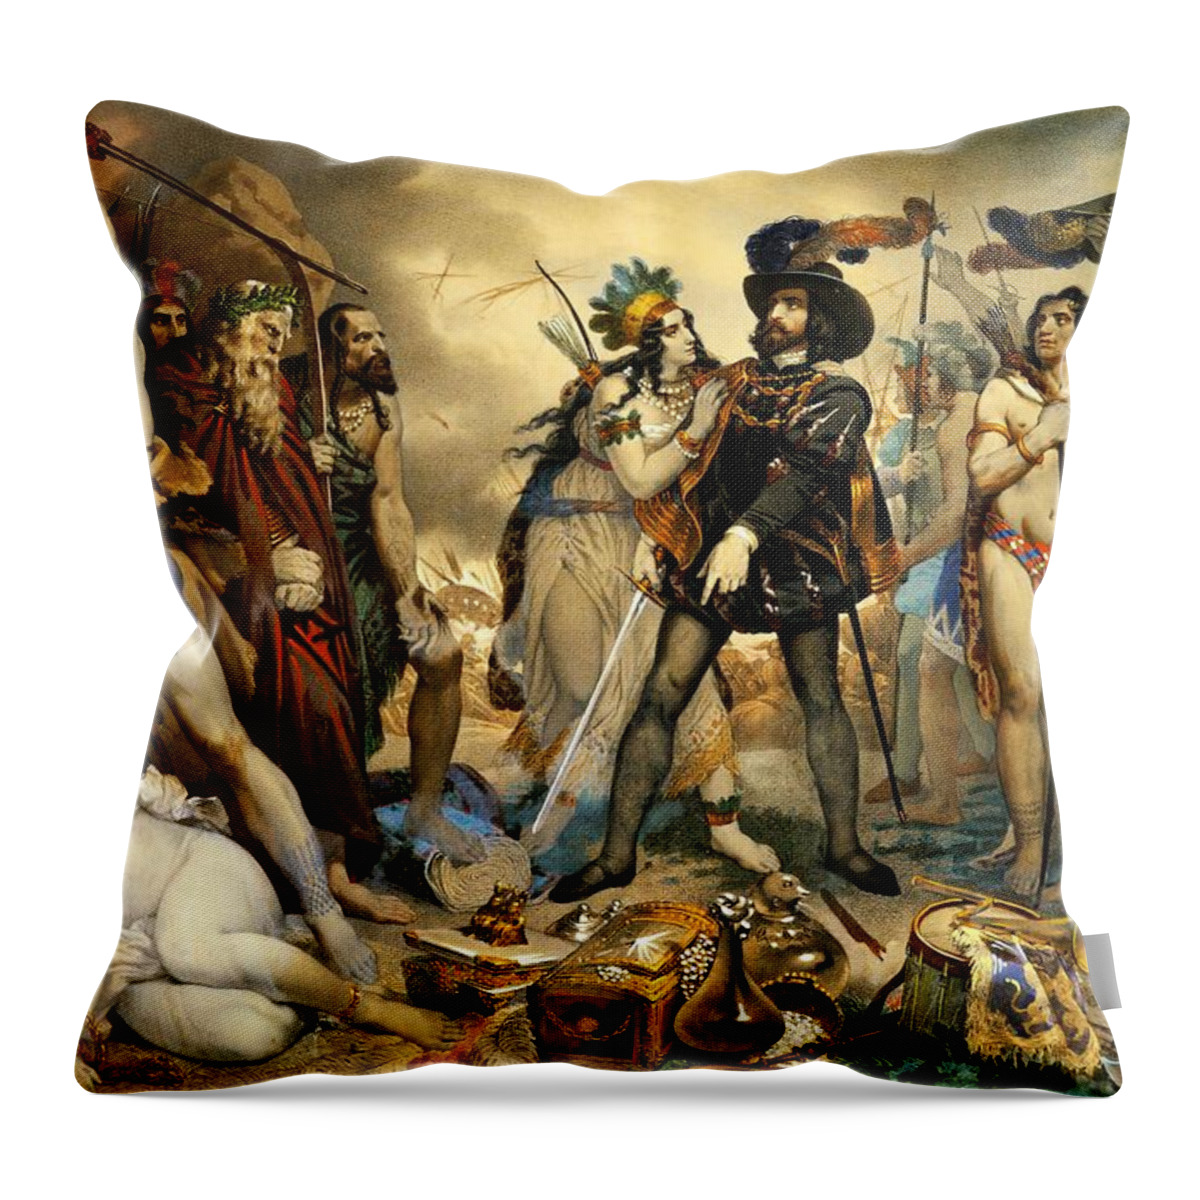 Cortez Orders His Fleet To Be Destroyed Throw Pillow featuring the drawing Nicolas-Eustache Maurin / 'Cortez orders his fleet to be destroyed', 19th, Engraving. by Nicolas-Eustache Maurin -1799-1850-